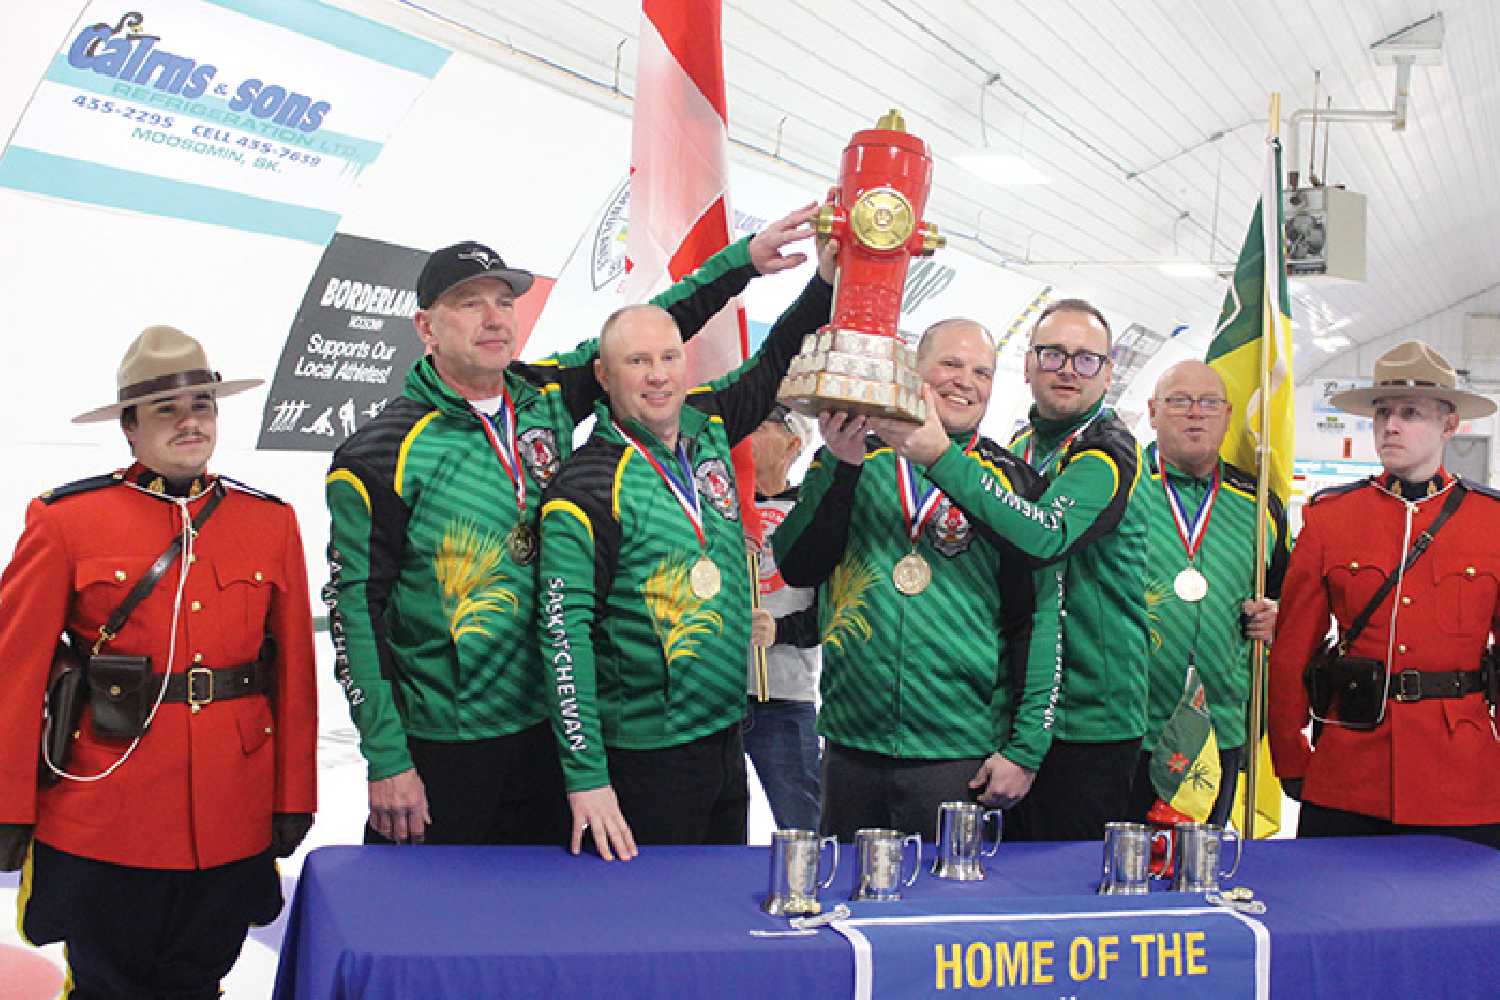 Saskatchewan won the gold medal at the Canadian Firefighters Curling Championships in Moosomin. Alberta won silver and Ontario took the bronze.